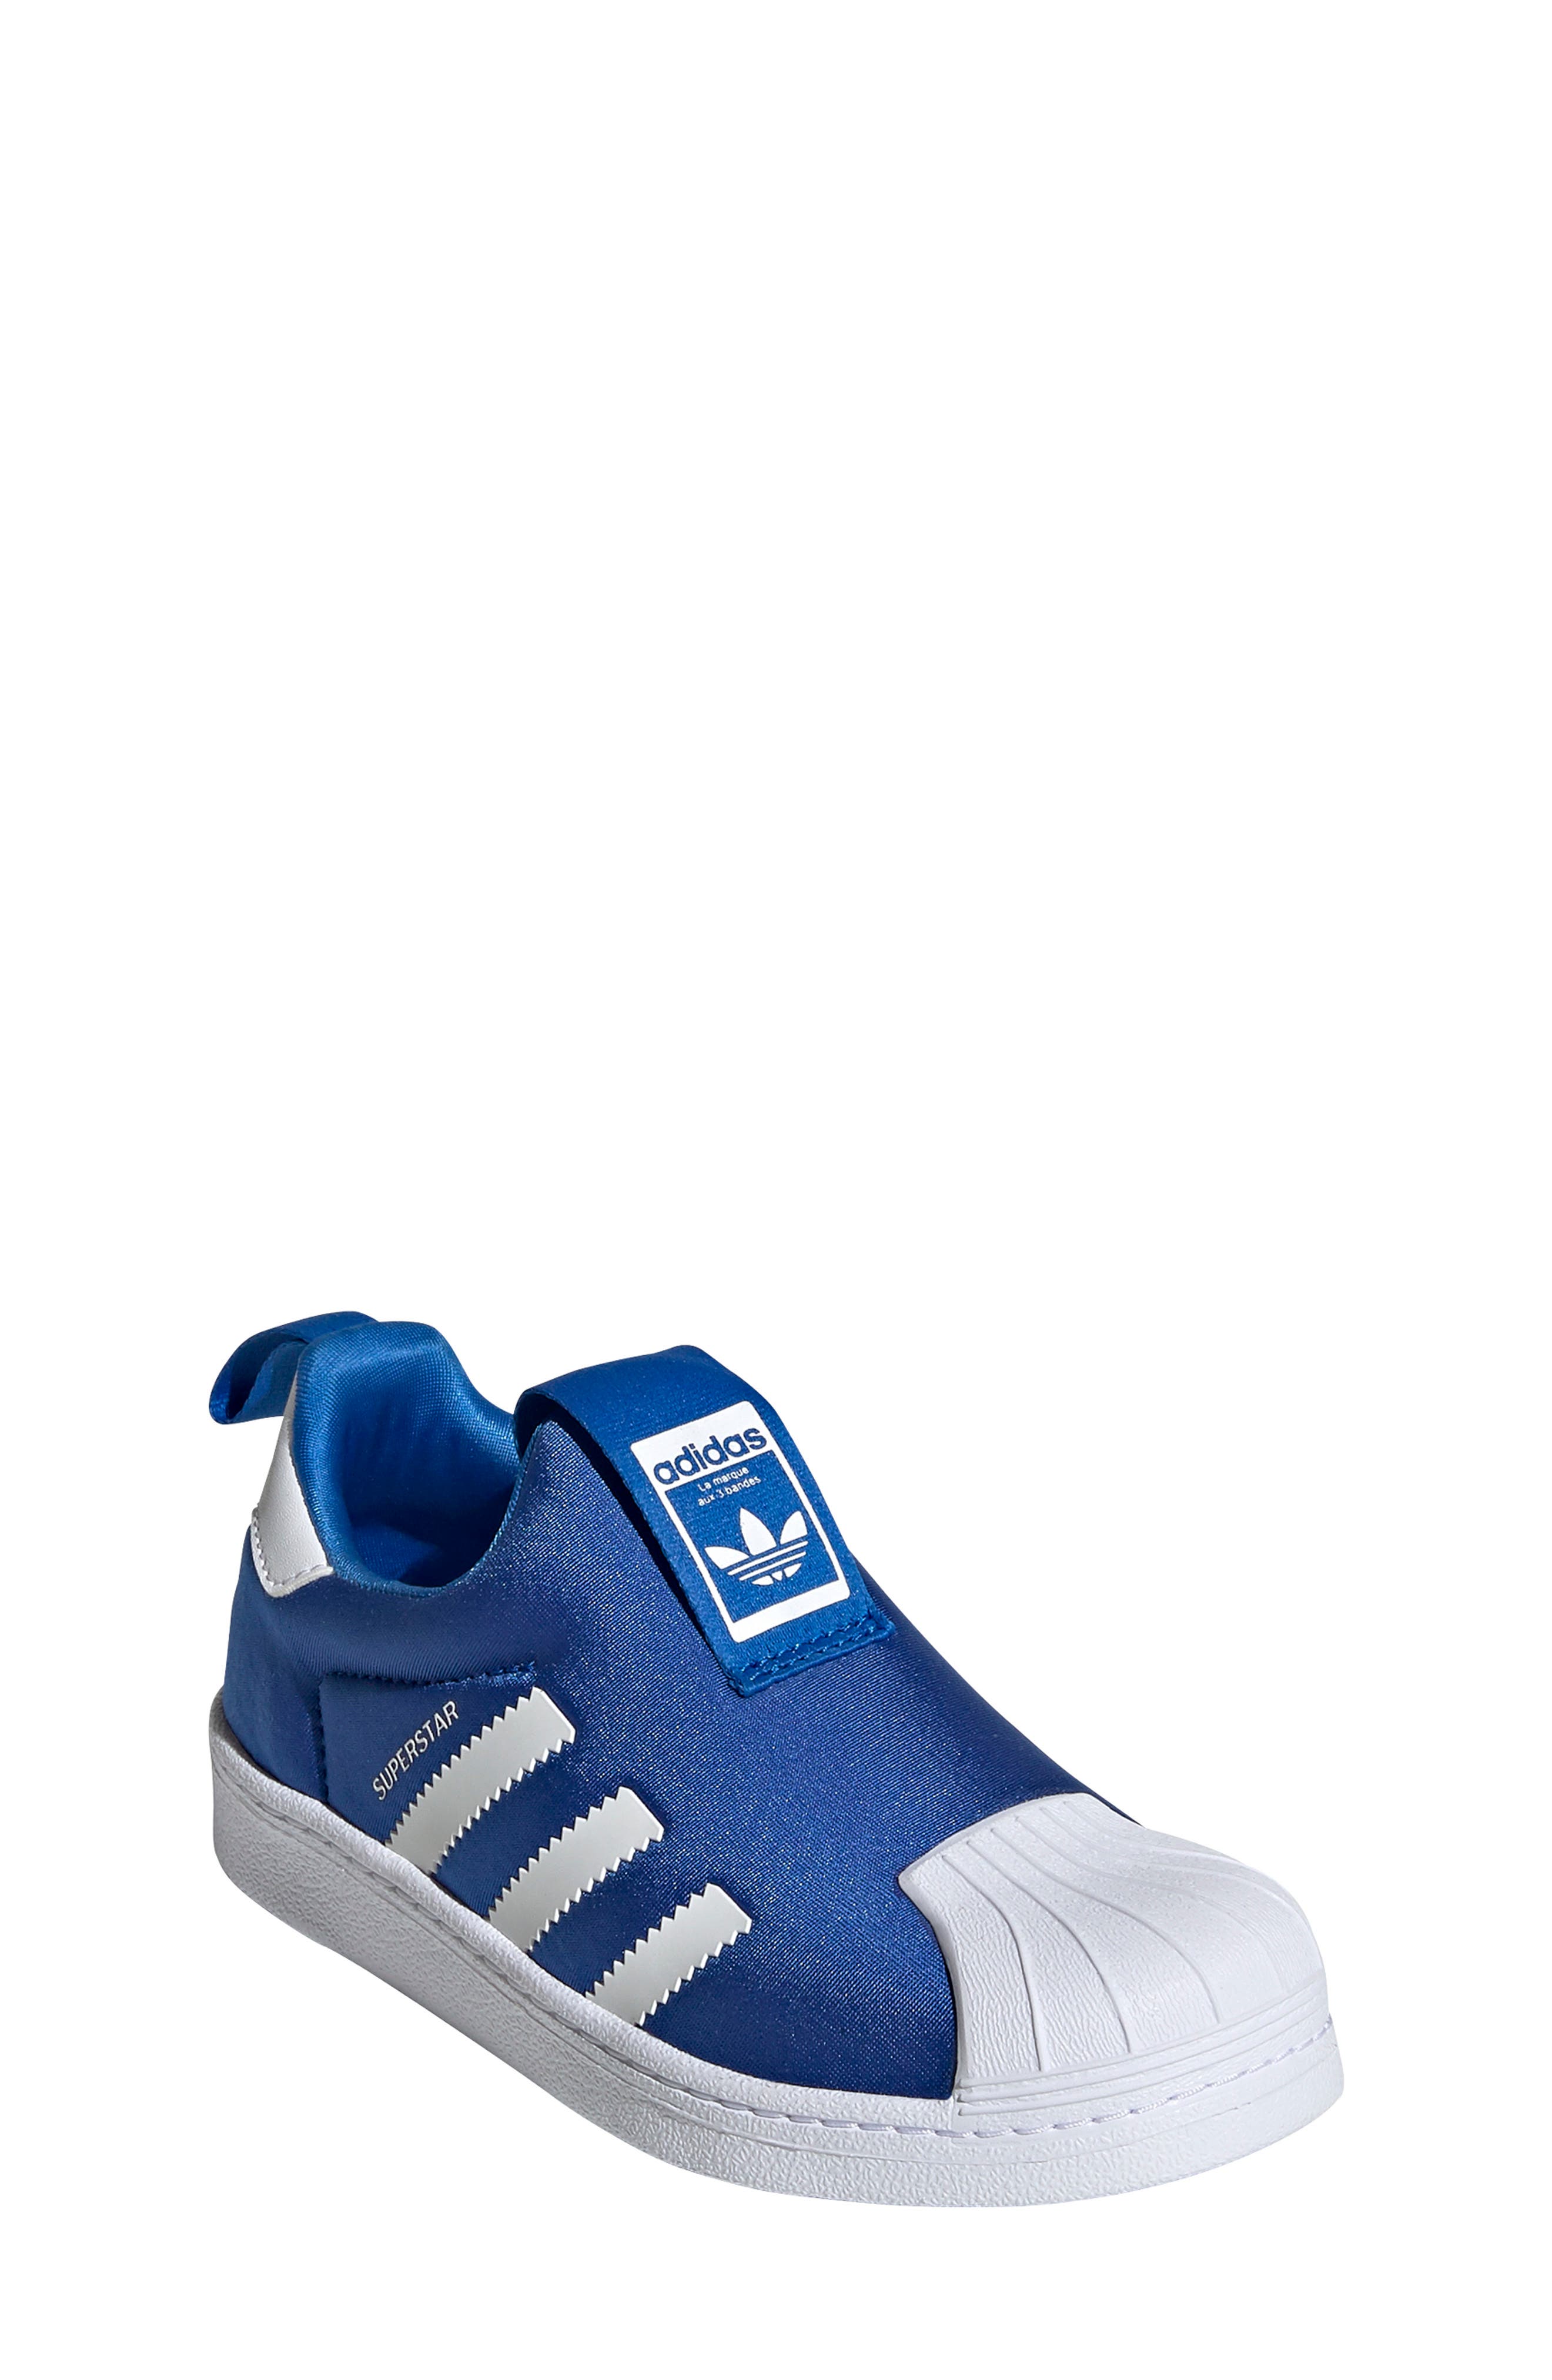 adidas shoes for little kids